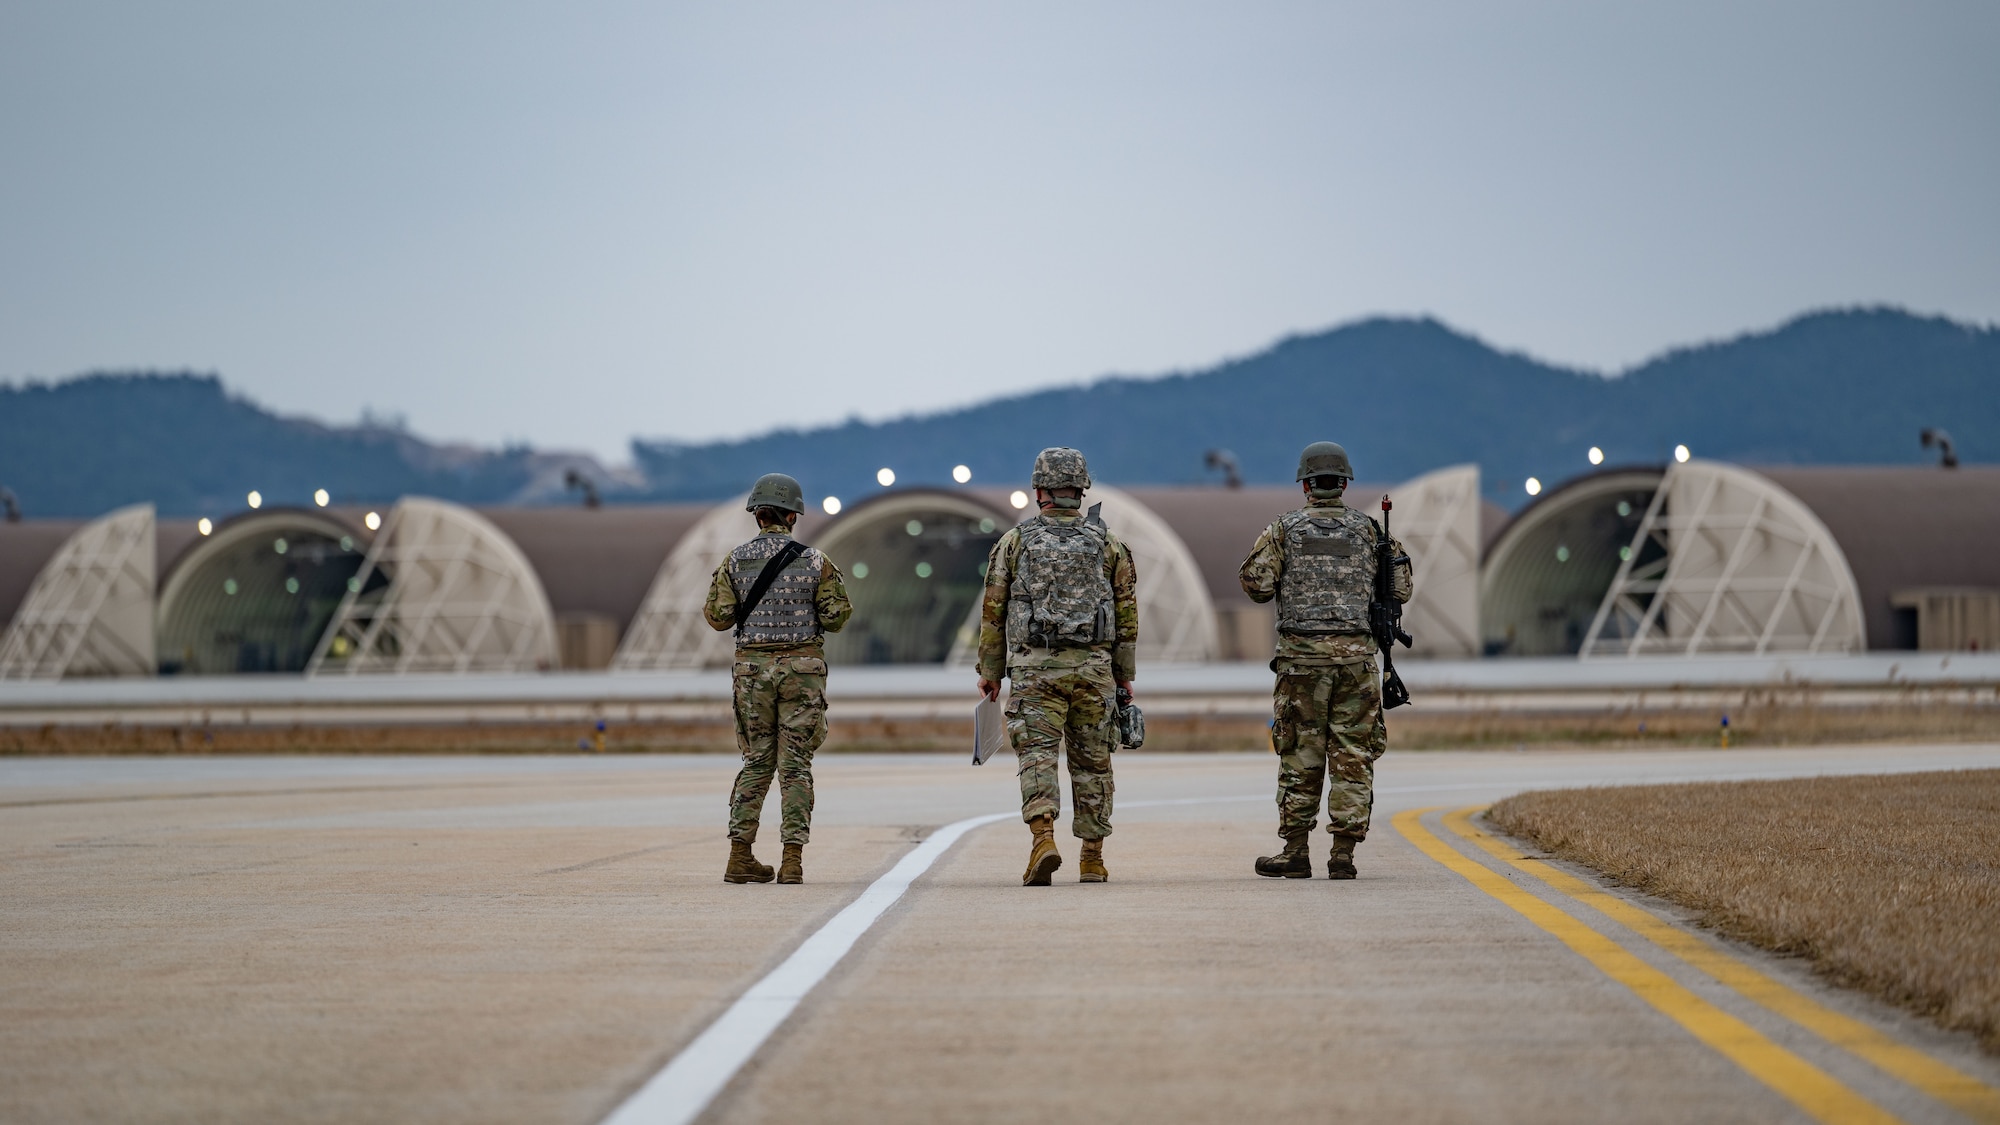 Staff Sgt. Quin Ball, Staff Sgt. Evan Fye and Senior Airman Metcalfe conduct armed guard surveillance on the flight line.